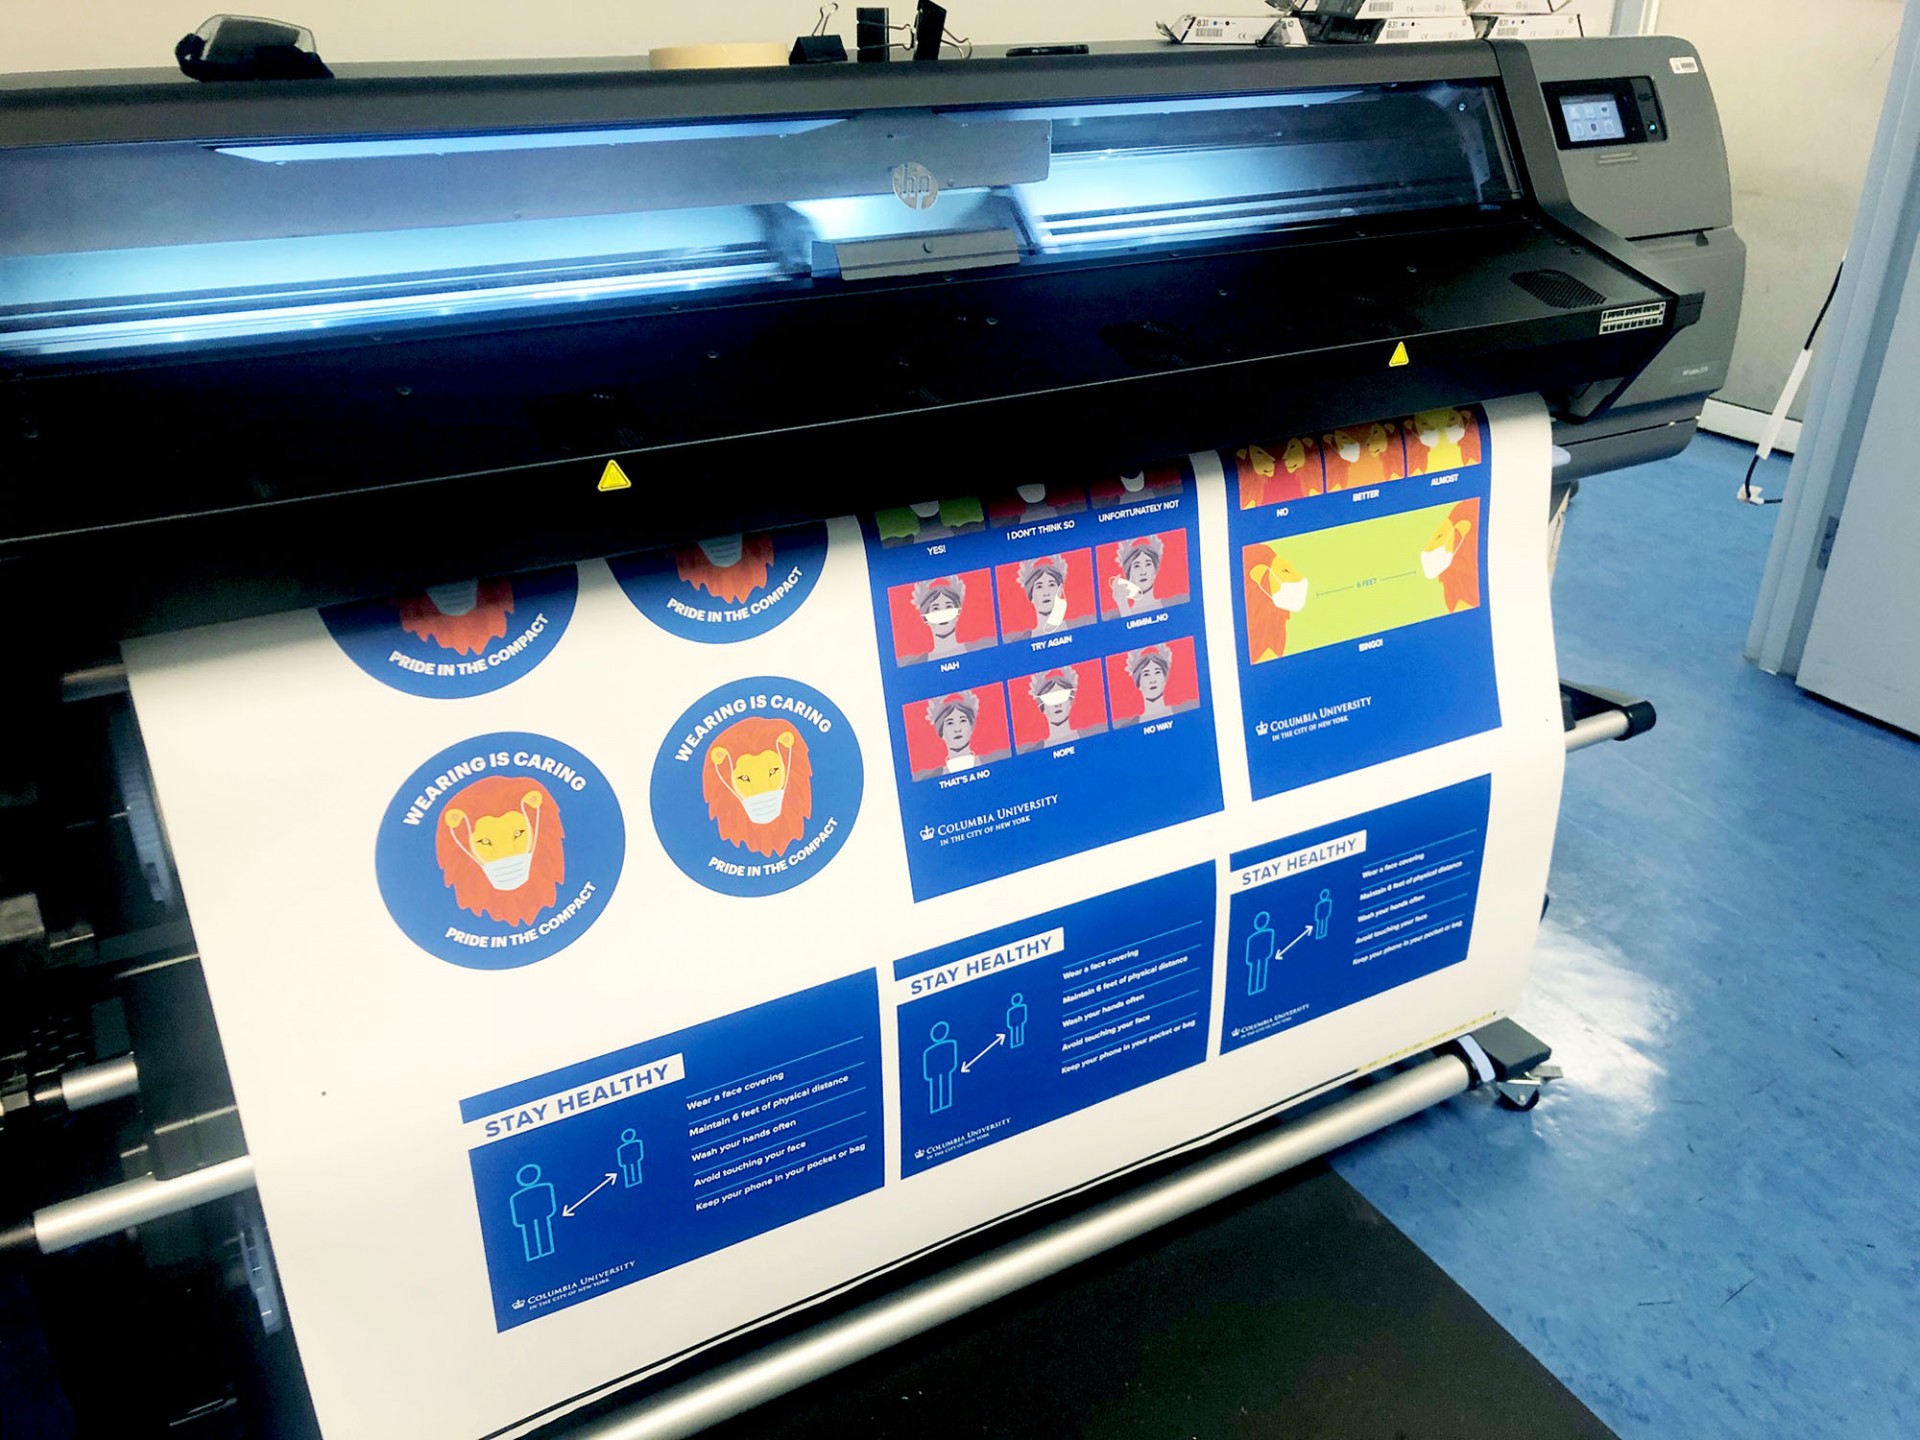 Printer showing a sheet of example images for stickers and postcards under the Stay Healthy campaign